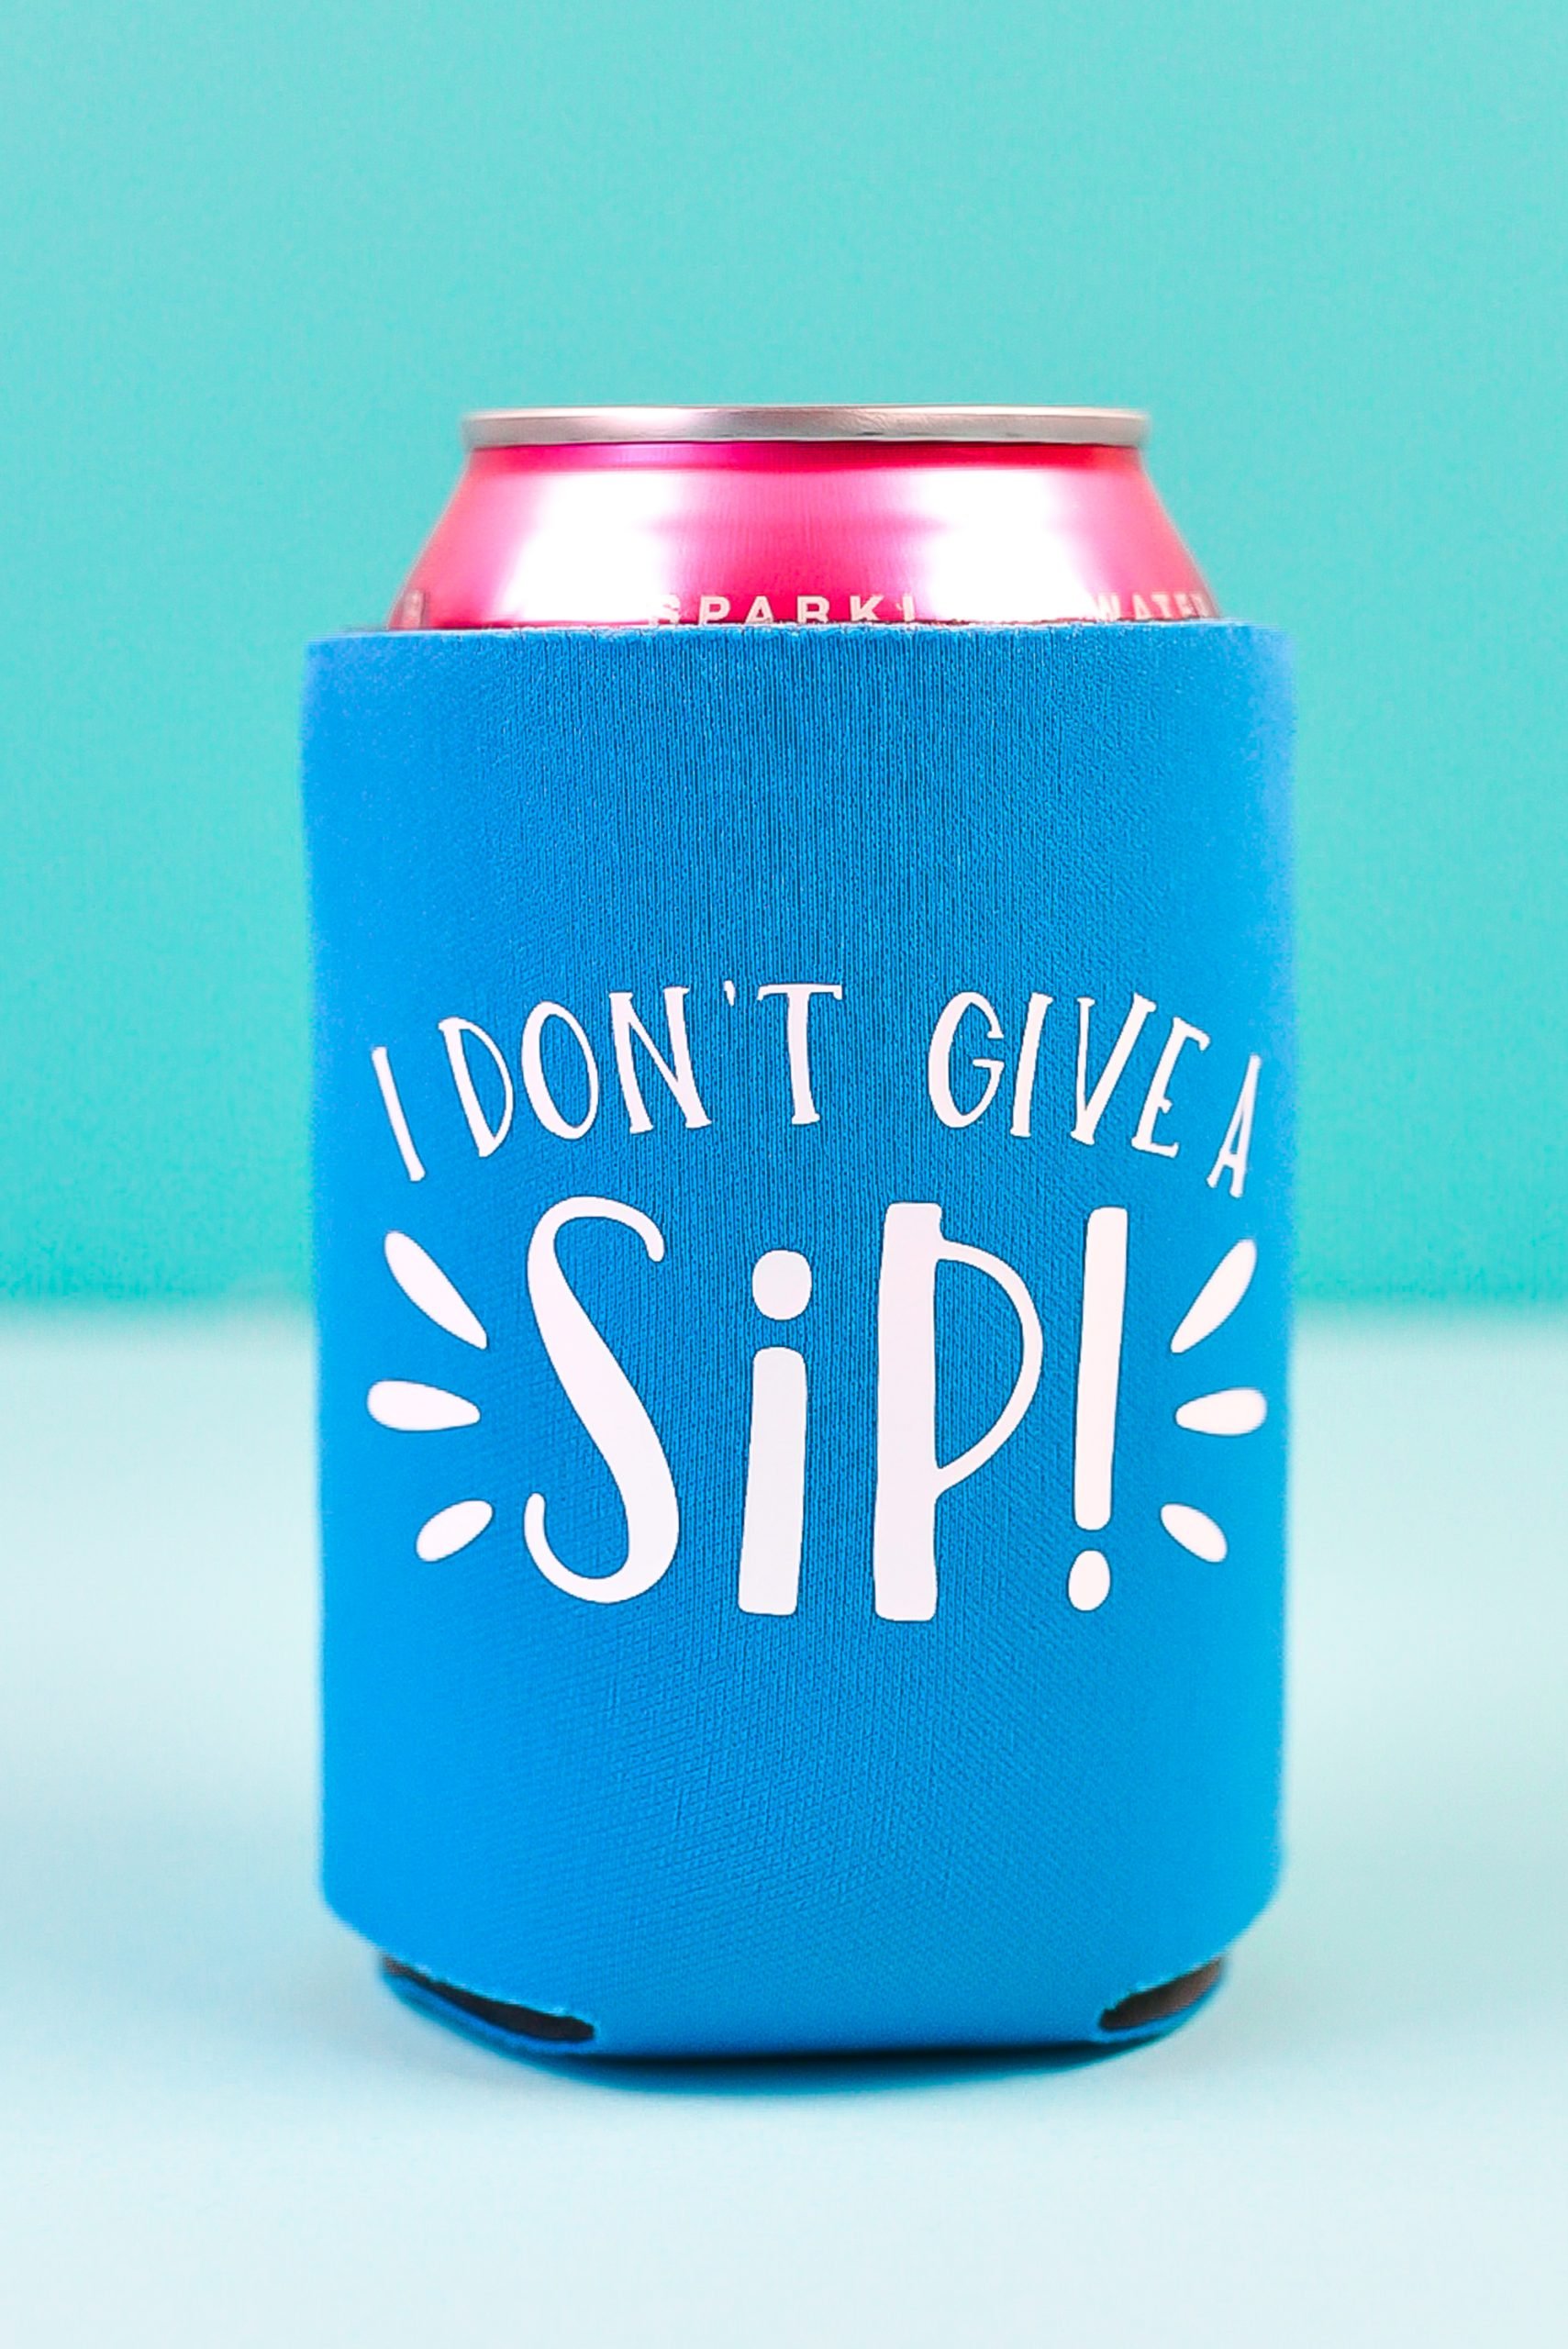 Download How to Make Cricut Can Koozies with Iron on Vinyl - Hey, Let's Make Stuff